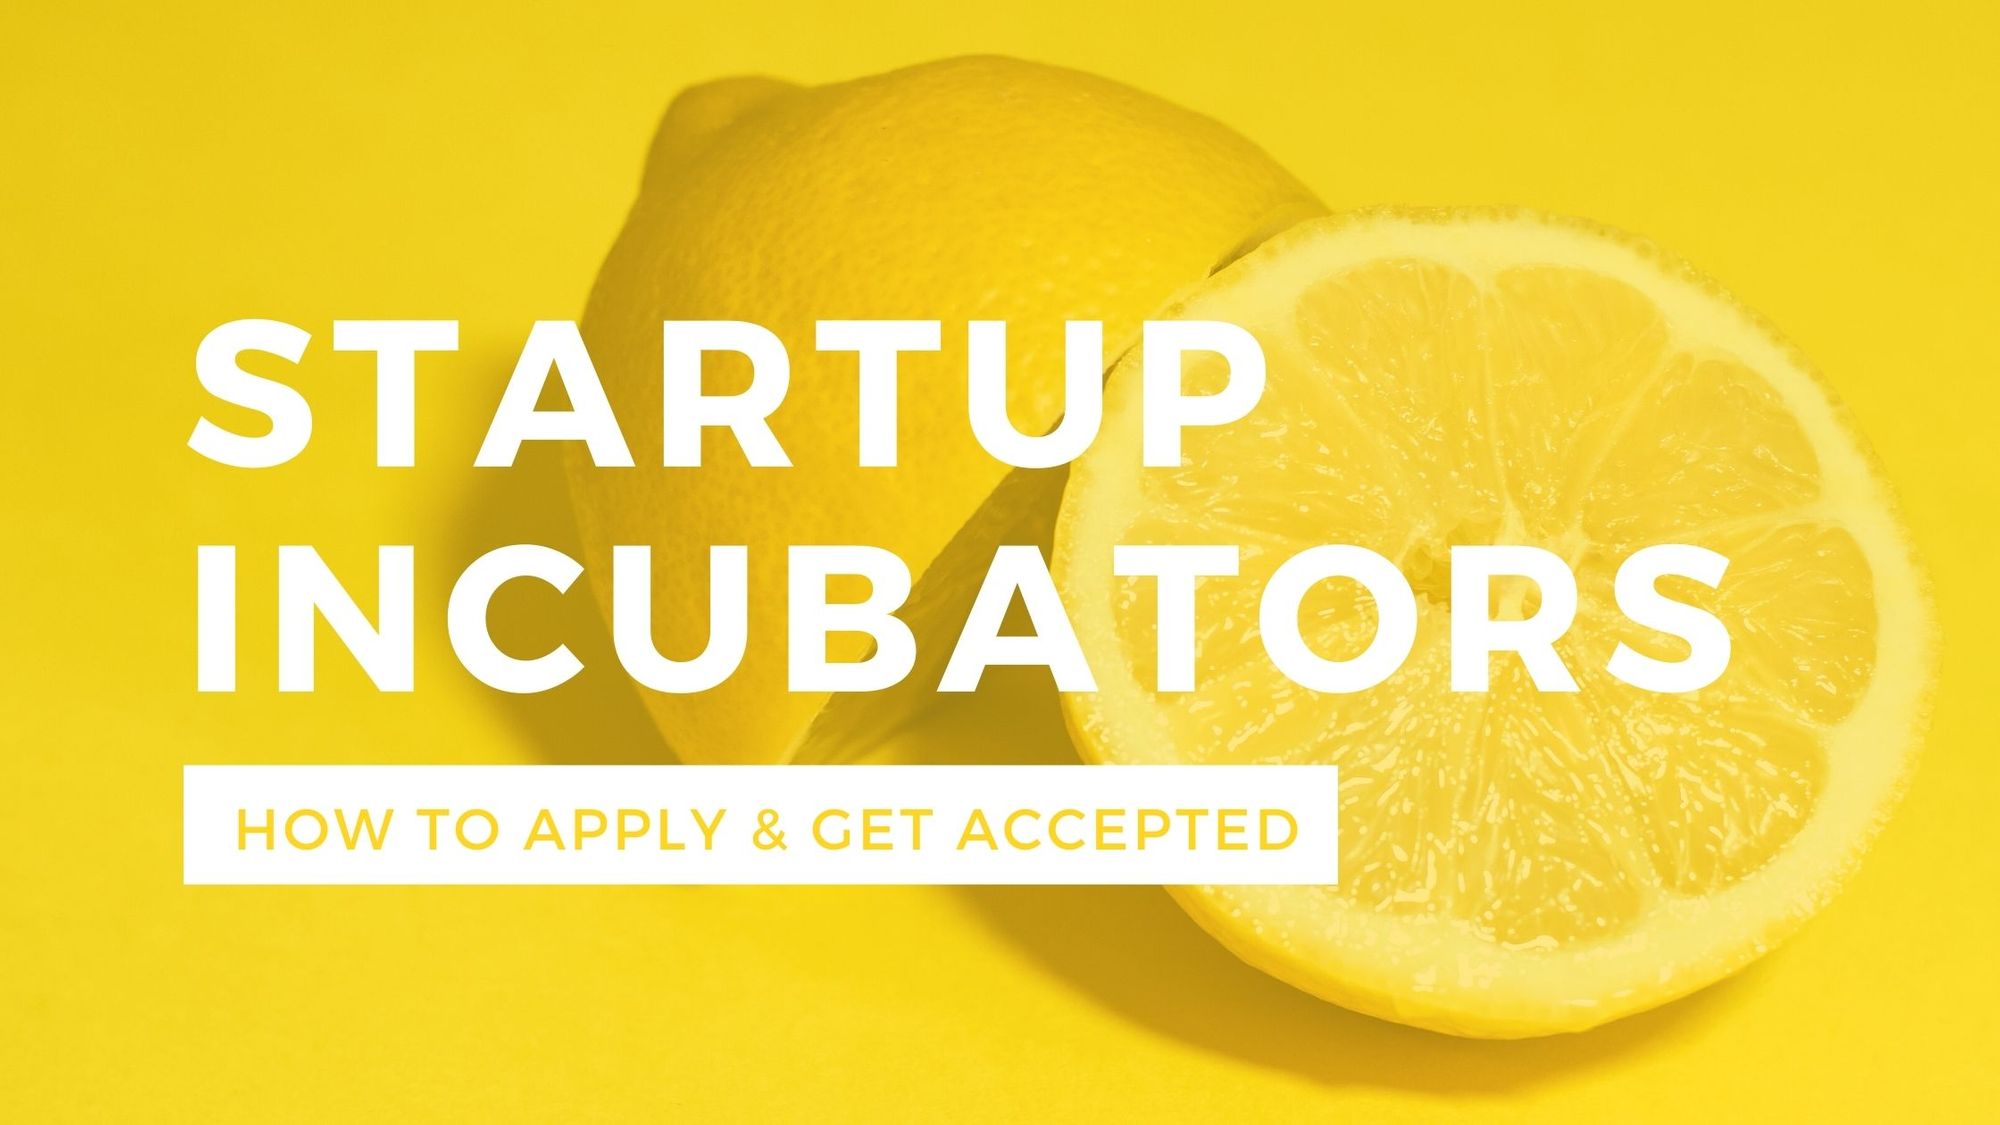 How to Apply and Get Accepted to a Startup Incubator